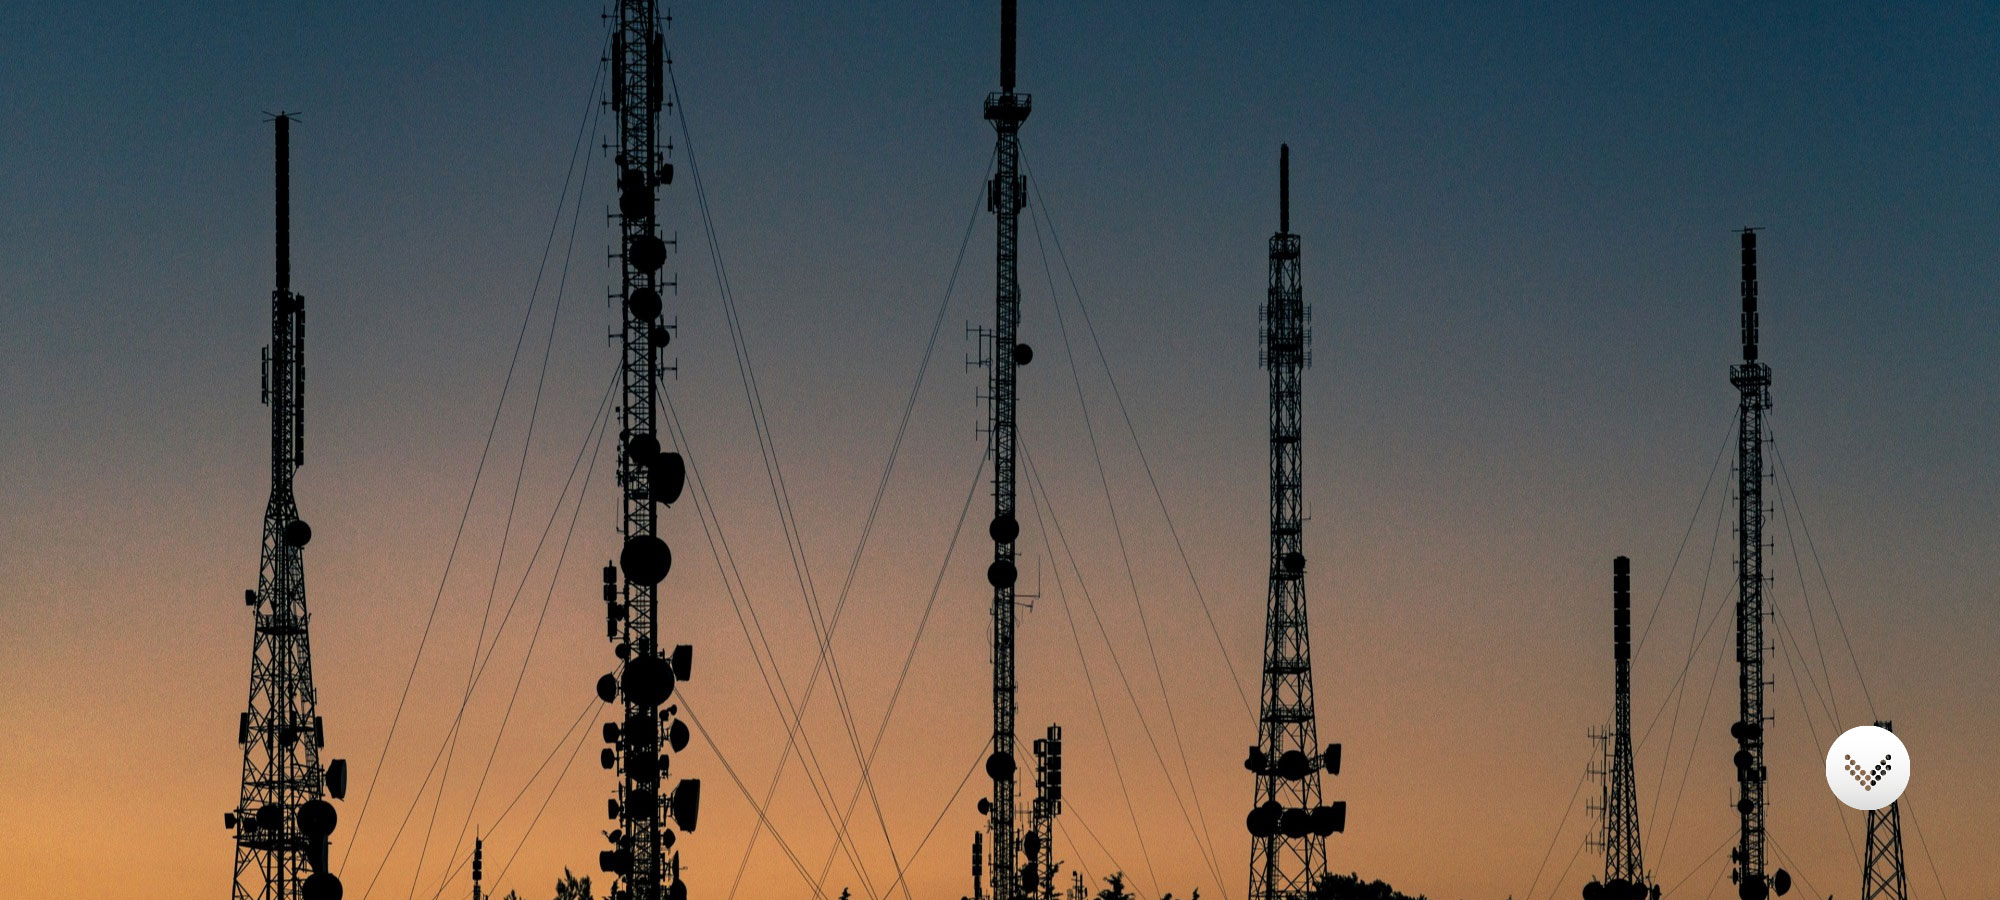 Several cell phone towers lined up and captured at sunset.